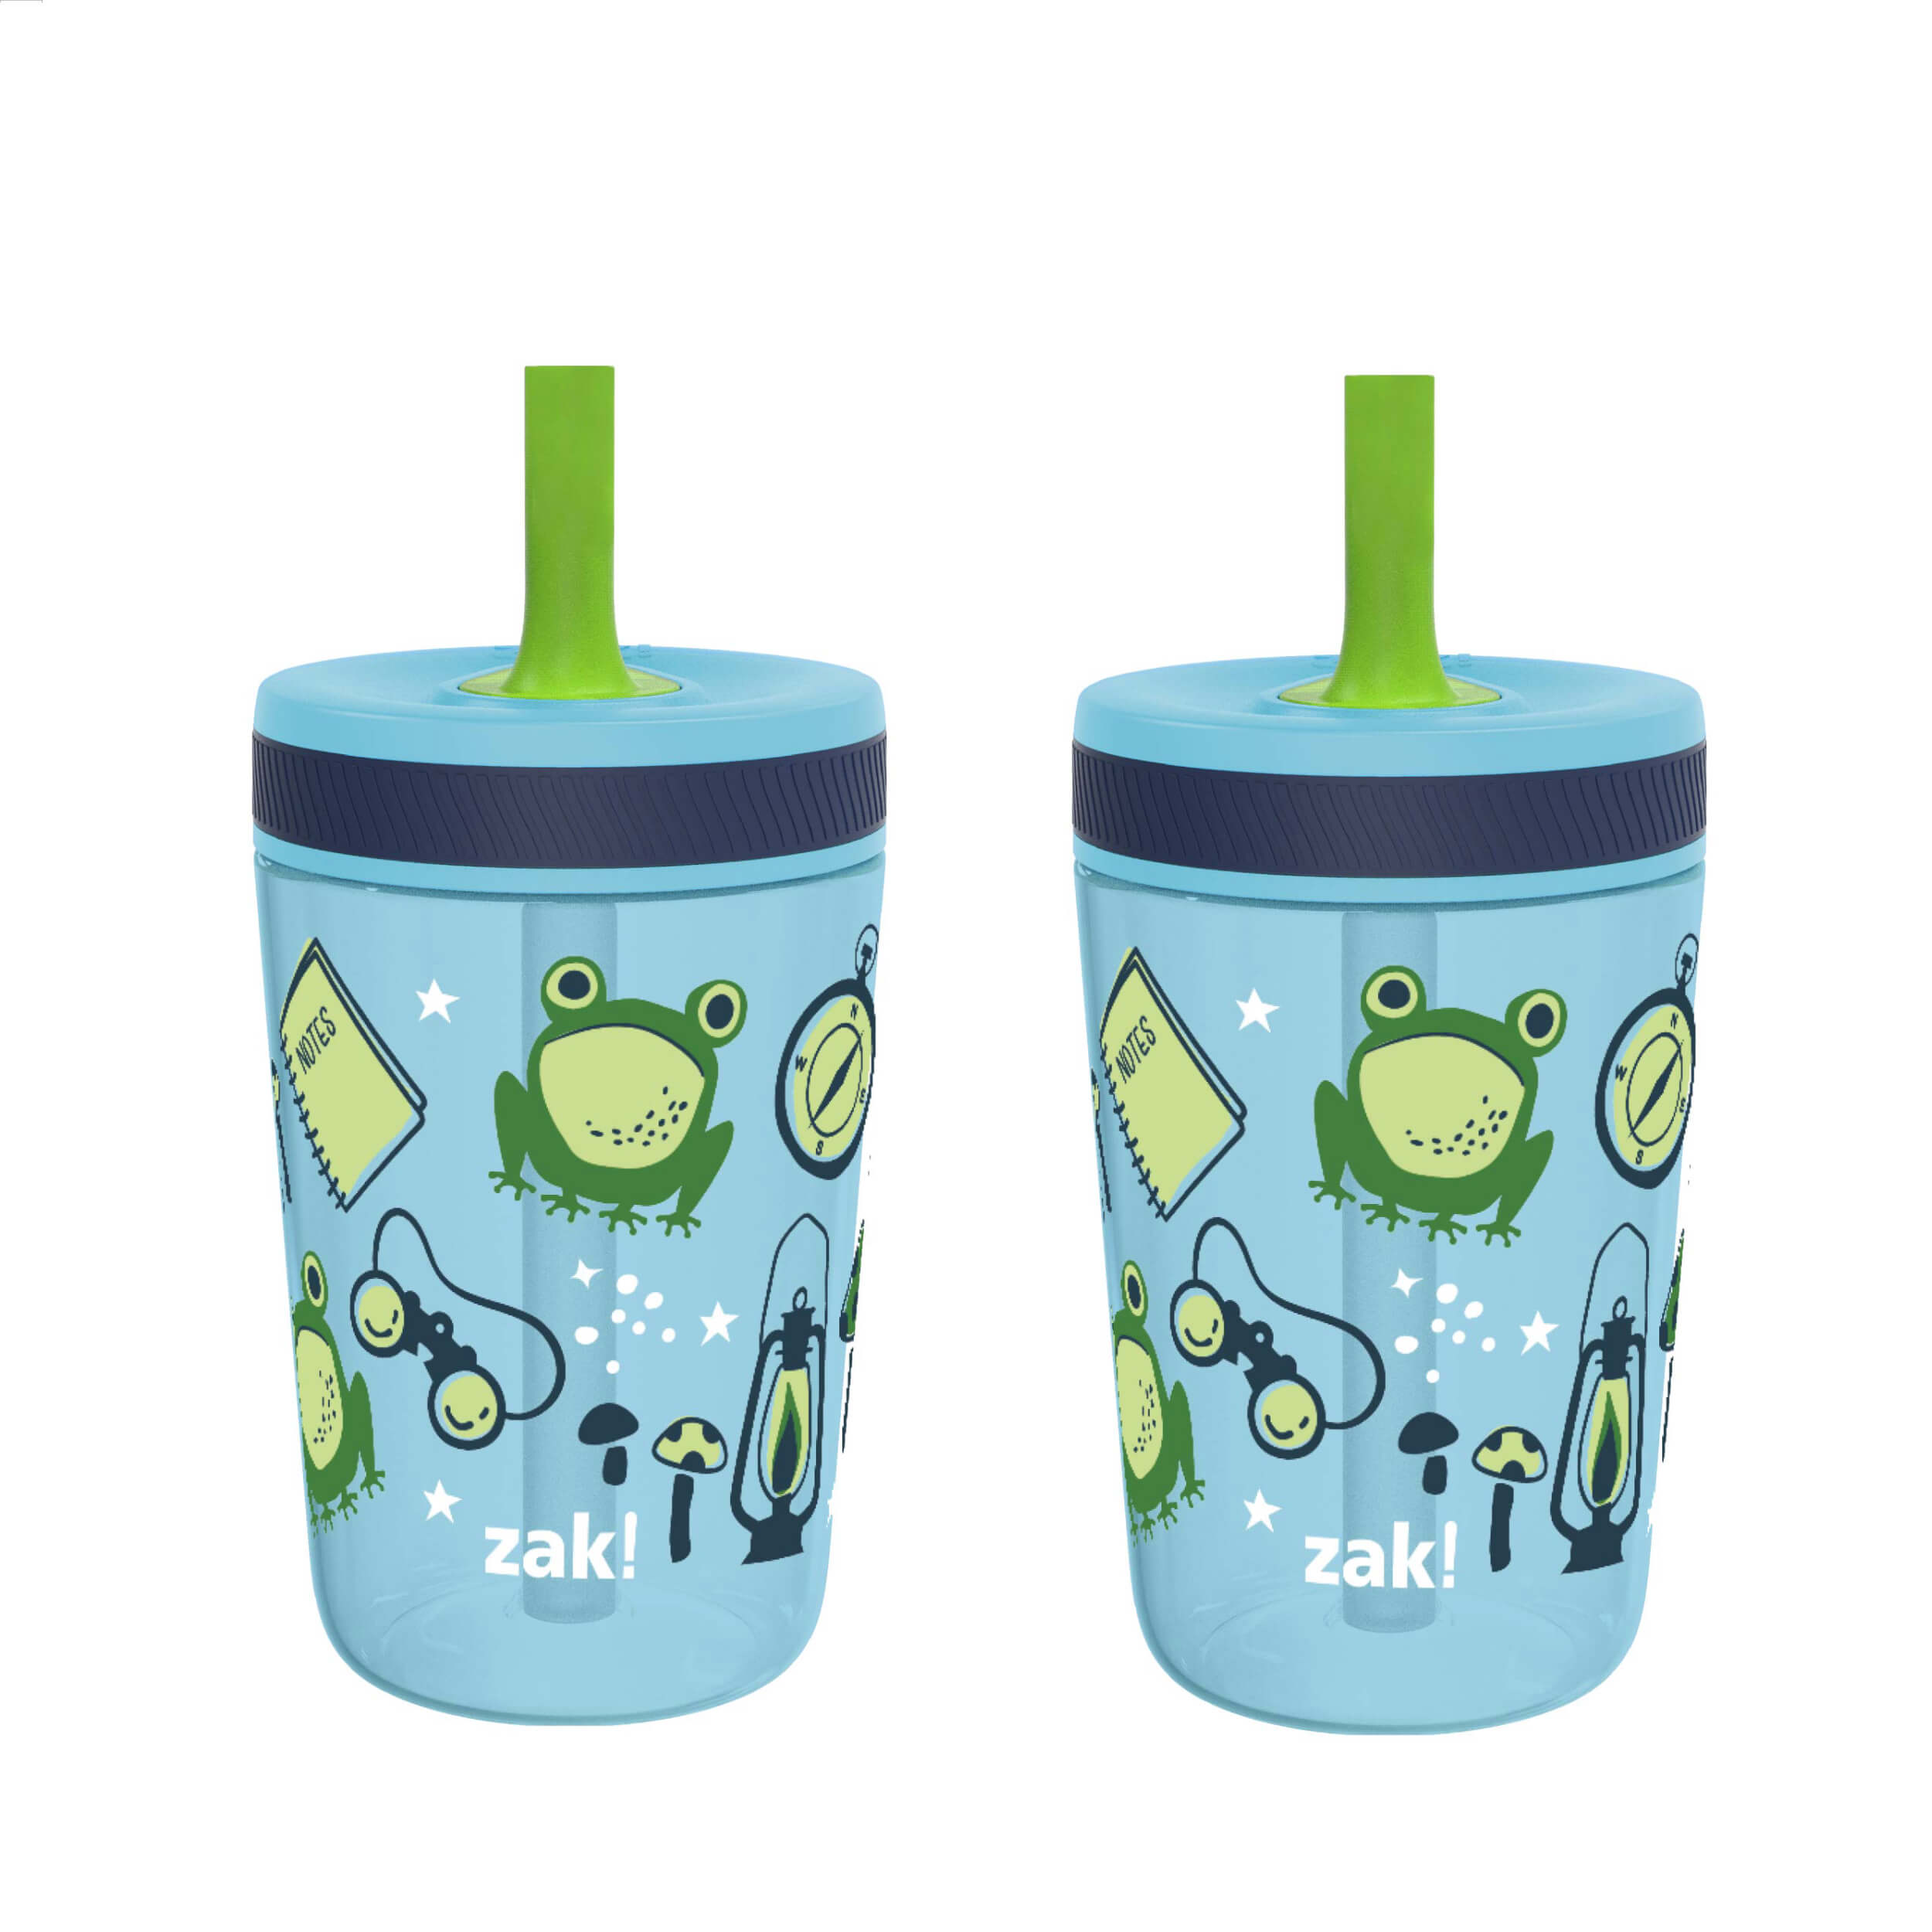 Zak Designs Sonic the Hedgehog Kelso Toddler Cups For Travel or At Home,  12oz Vacuum Insulated Stainless Steel Sippy Cup With Leak-Proof Design is  Perfect For Kids (Sonic, Tails, Knuckles) 